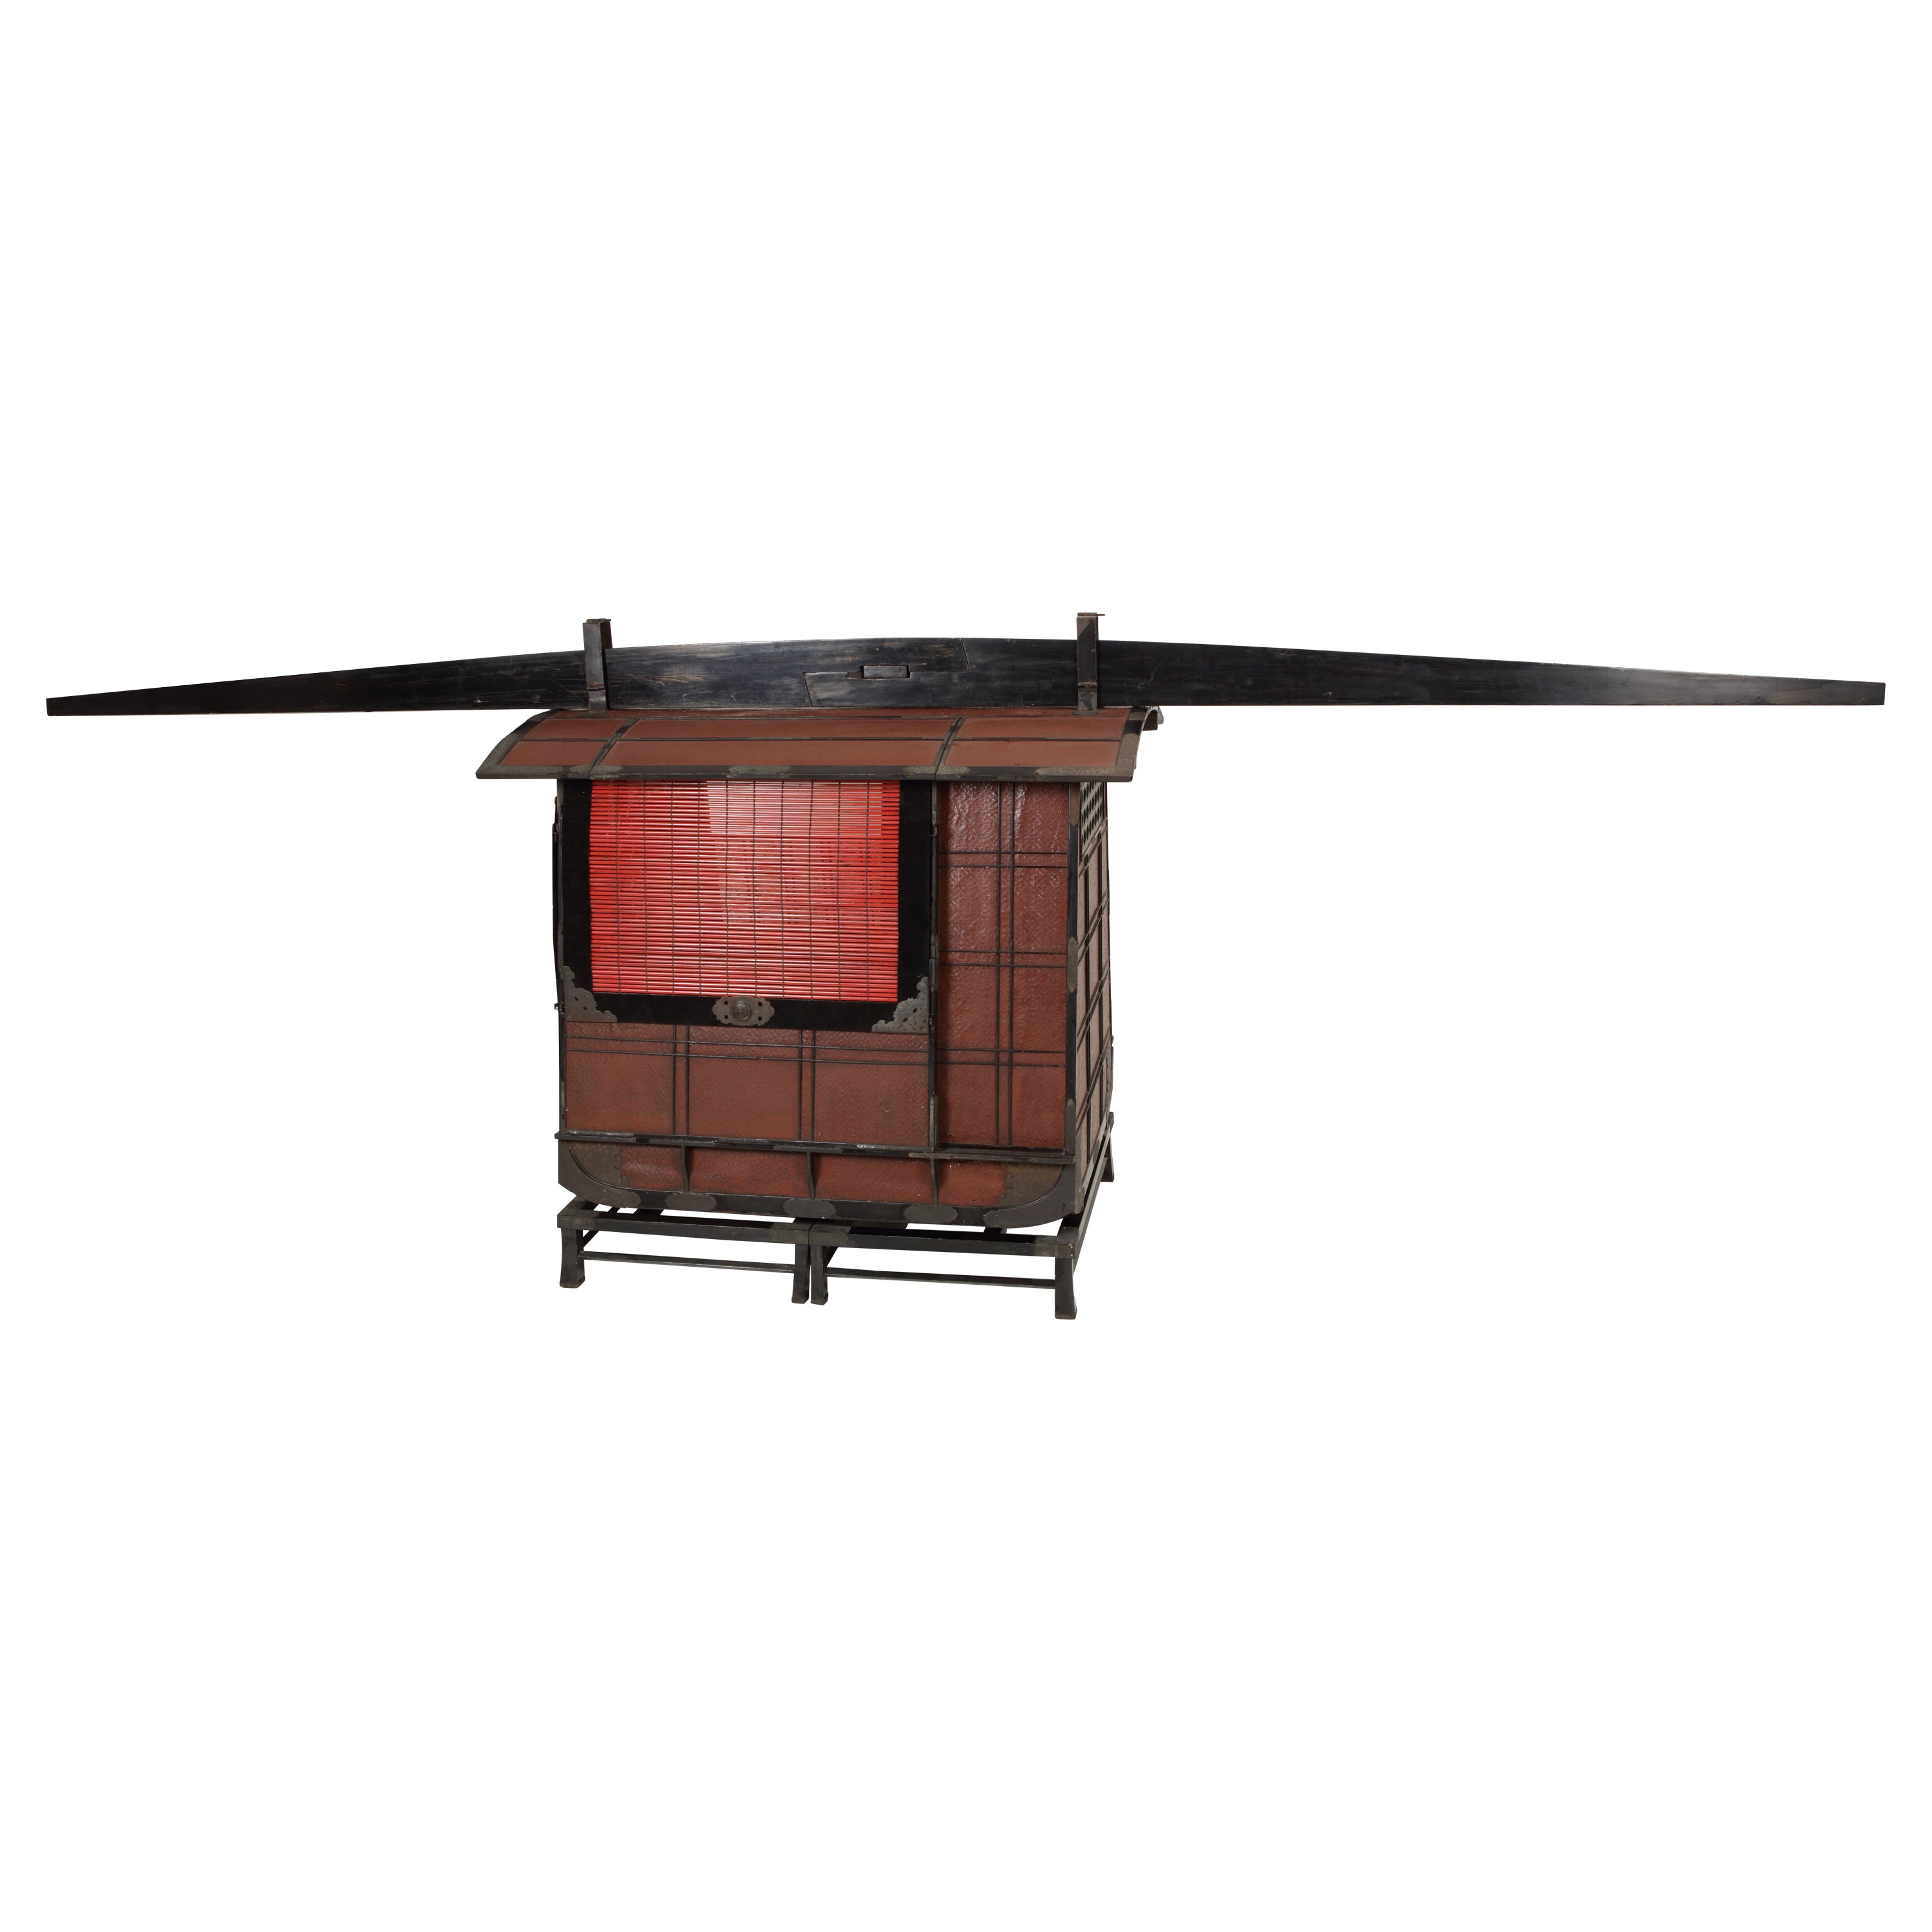 Japanese Life-Size, Edo Period, Red and Black Lacquered Palanquin or Norimono For Sale